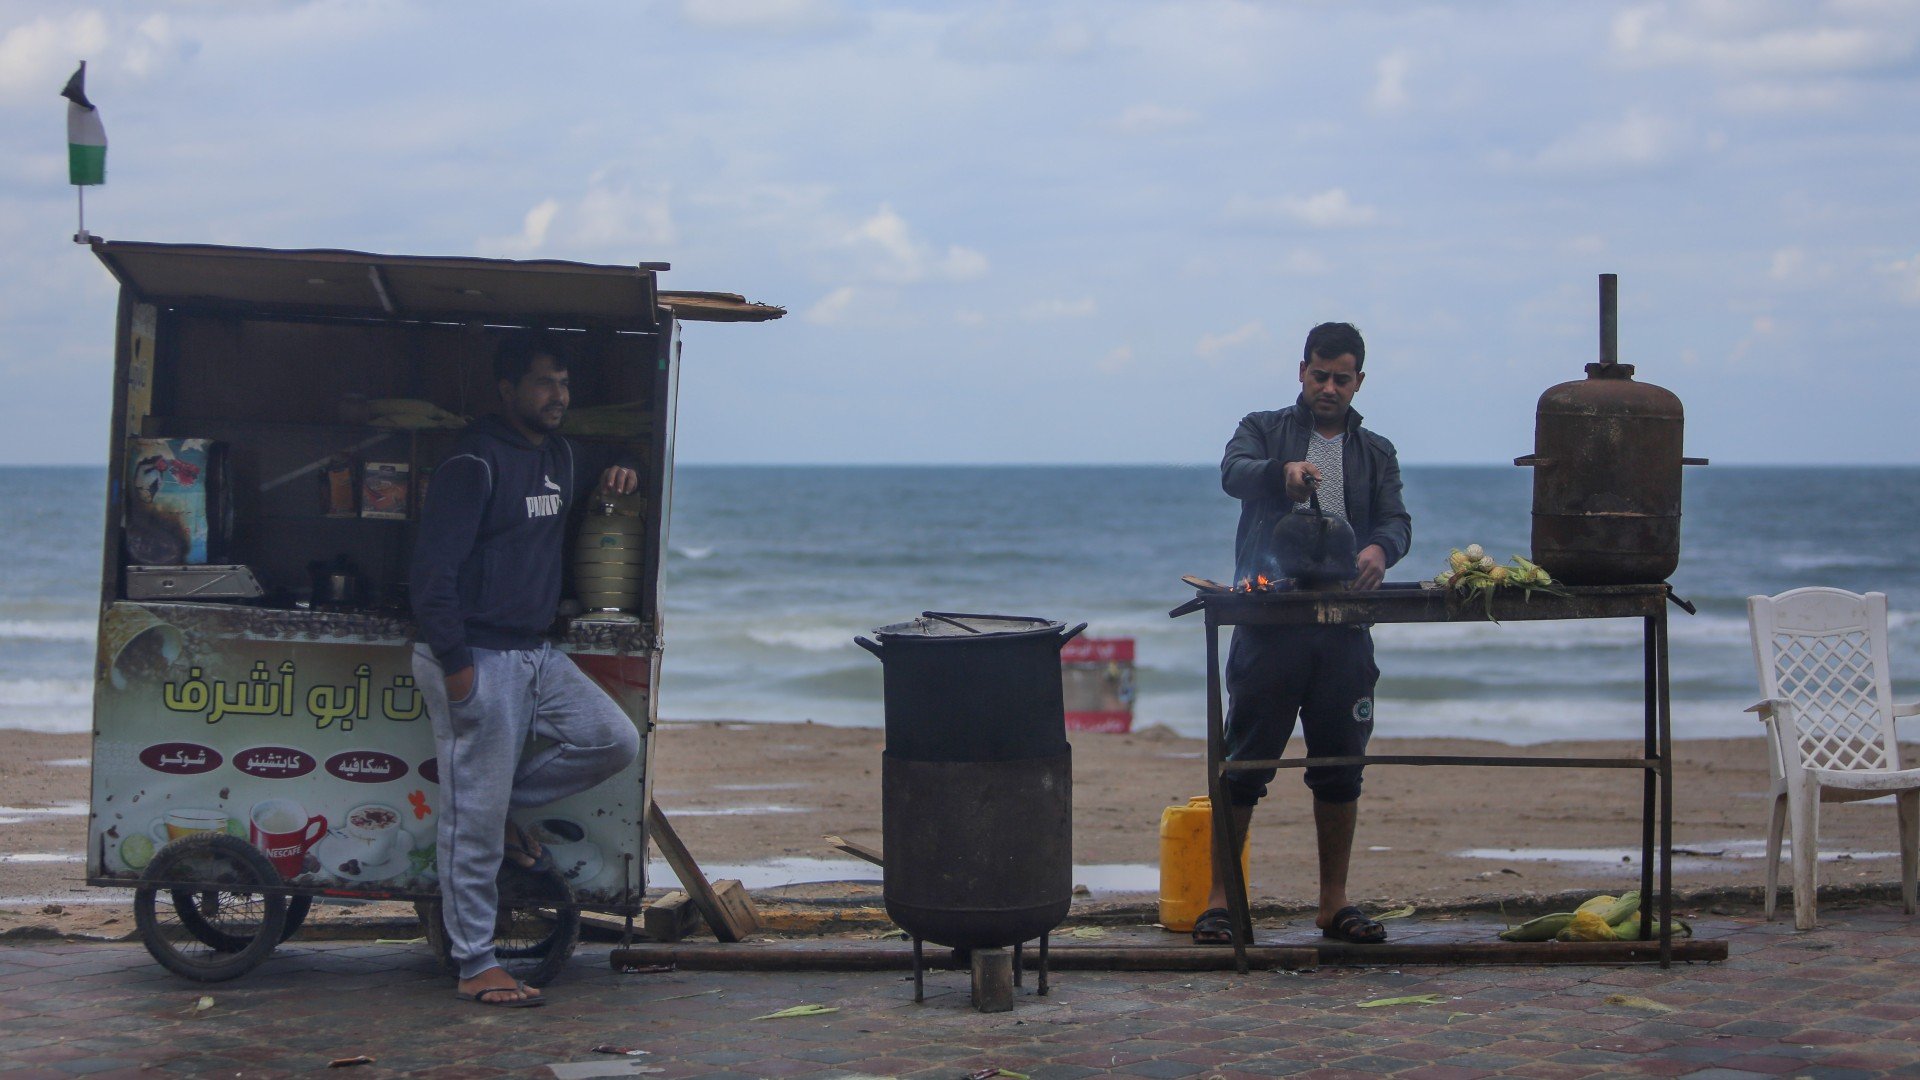 Informal vending carts are a common sight in Gaza, and provide affordable drinks and snacks for residents in the impoverished Palestinian territory (MEE/Muhammed Hajjar)